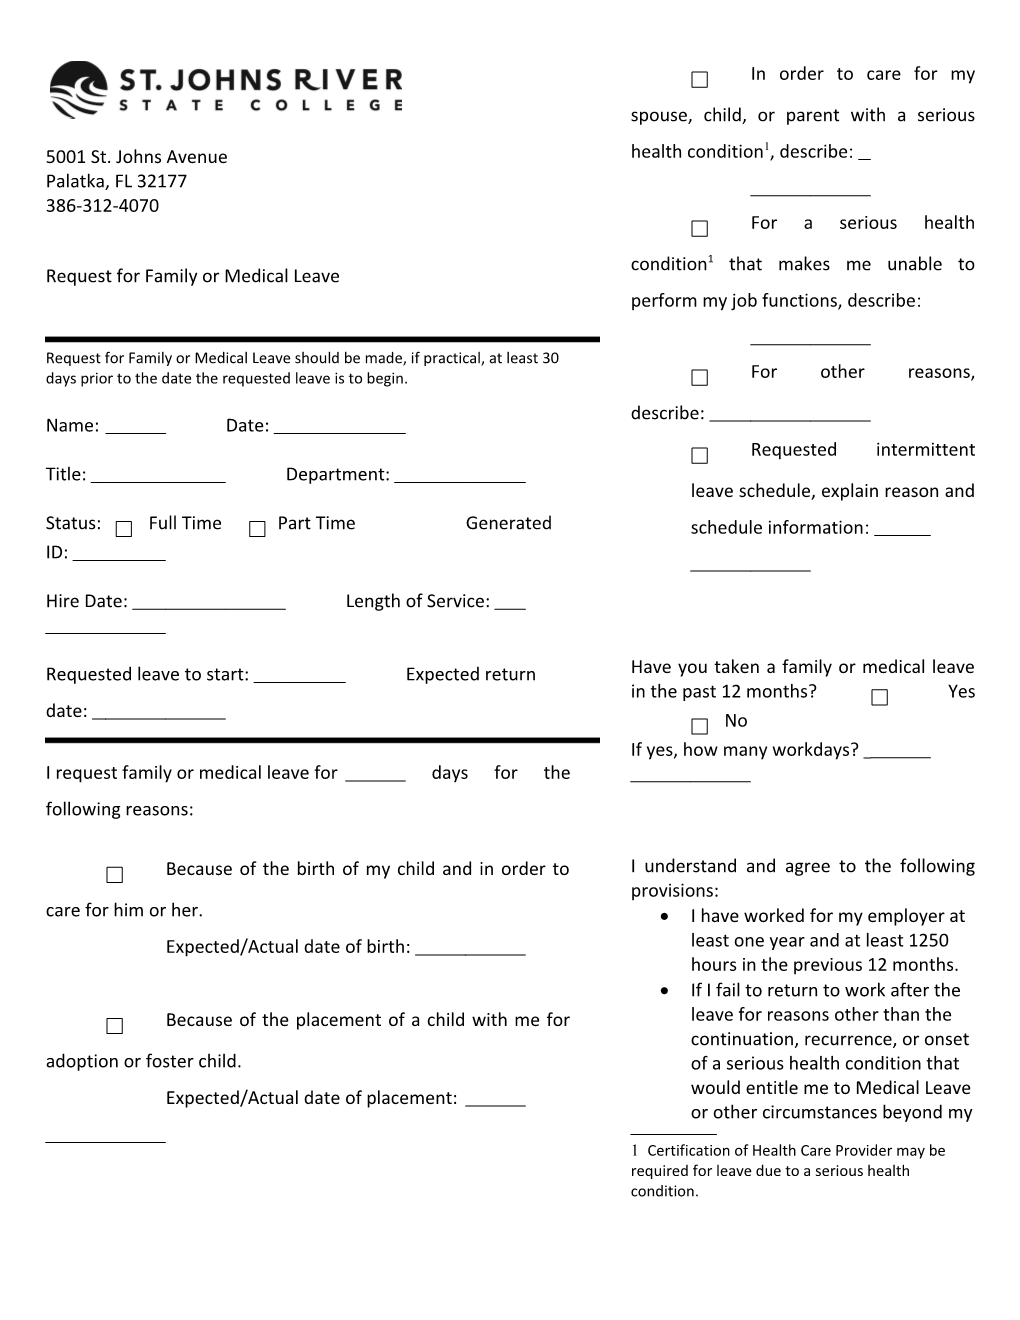 Request for Family Or Medical Leave